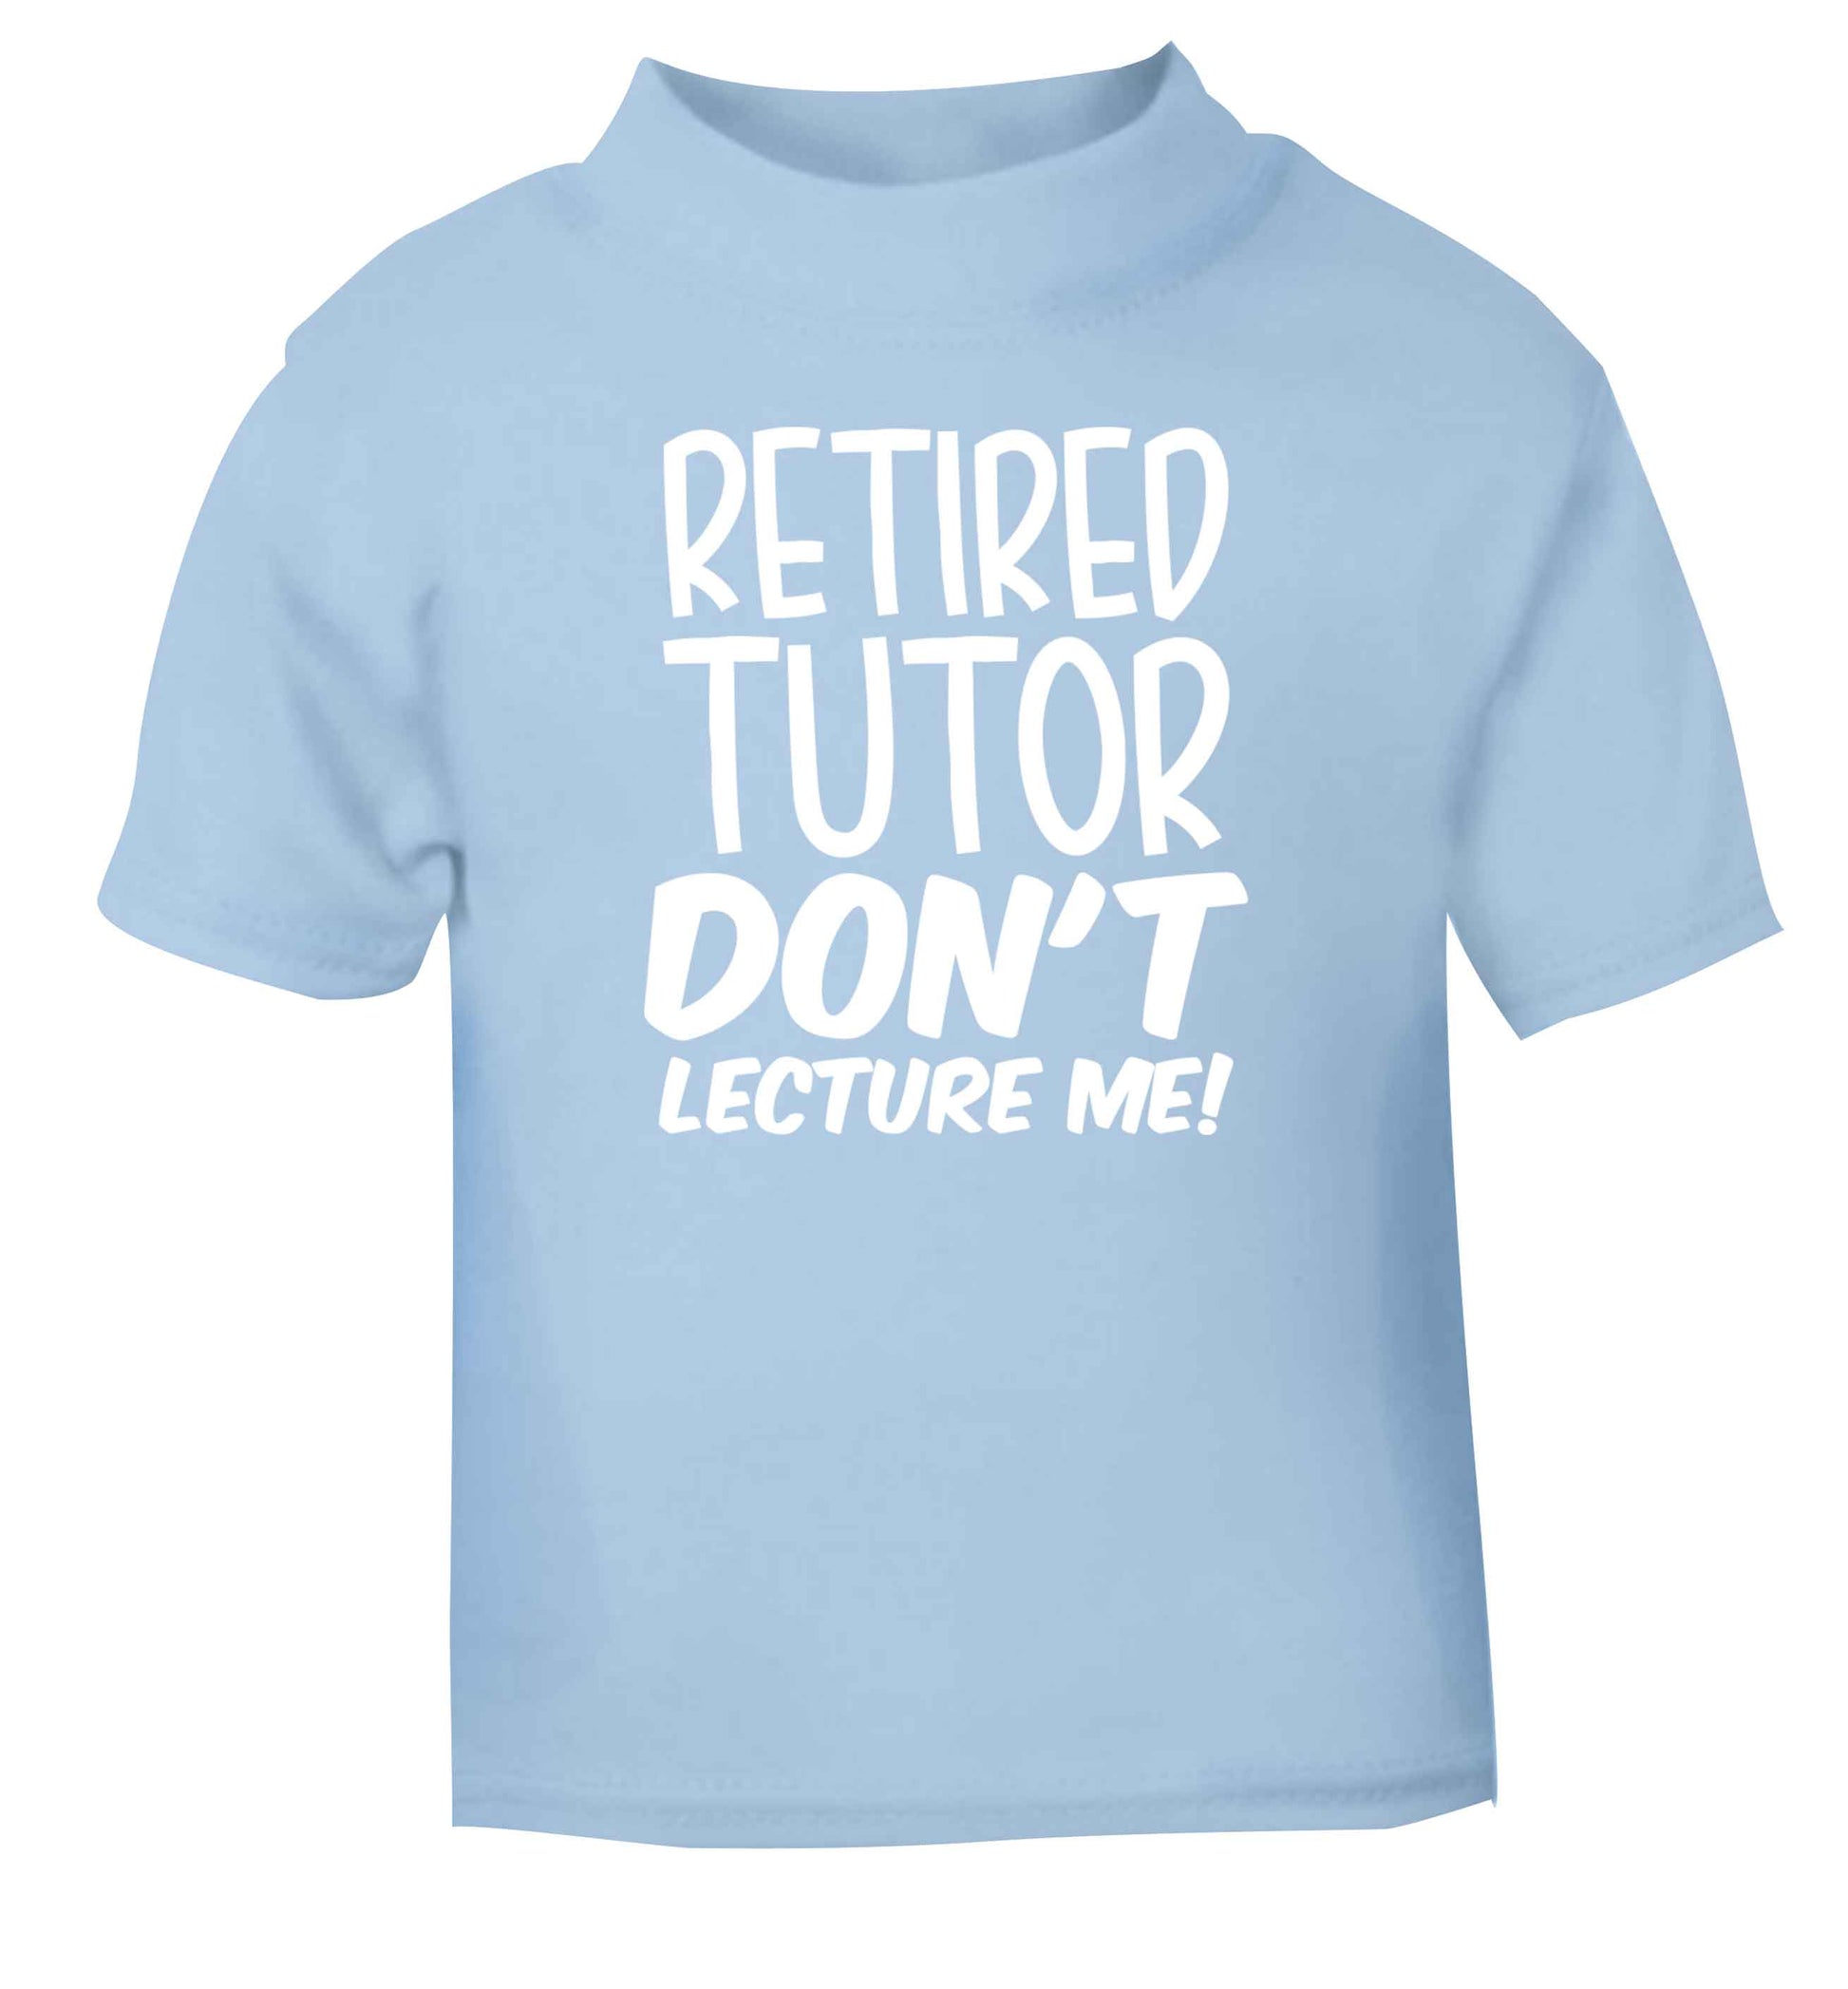 Retired tutor don't lecture me! light blue Baby Toddler Tshirt 2 Years